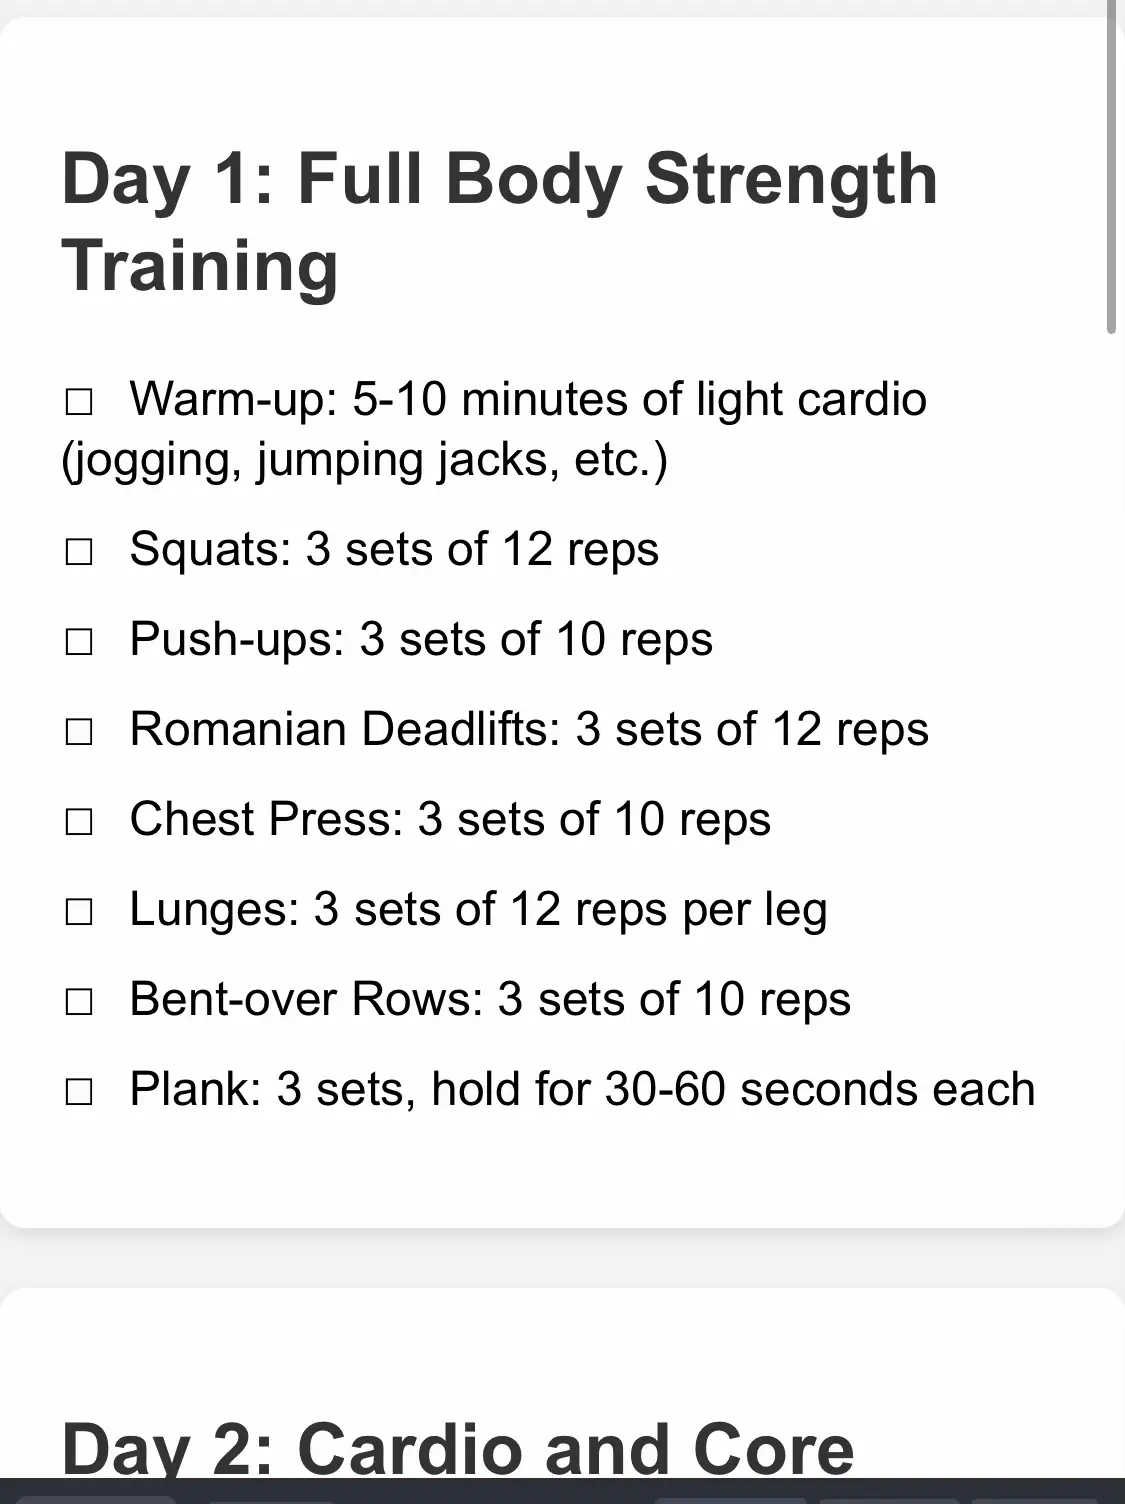 WORKOUT SCHEDULE FOR BEGINNERS 🏋️‍♀️⚡️, Gallery posted by Hannahisme